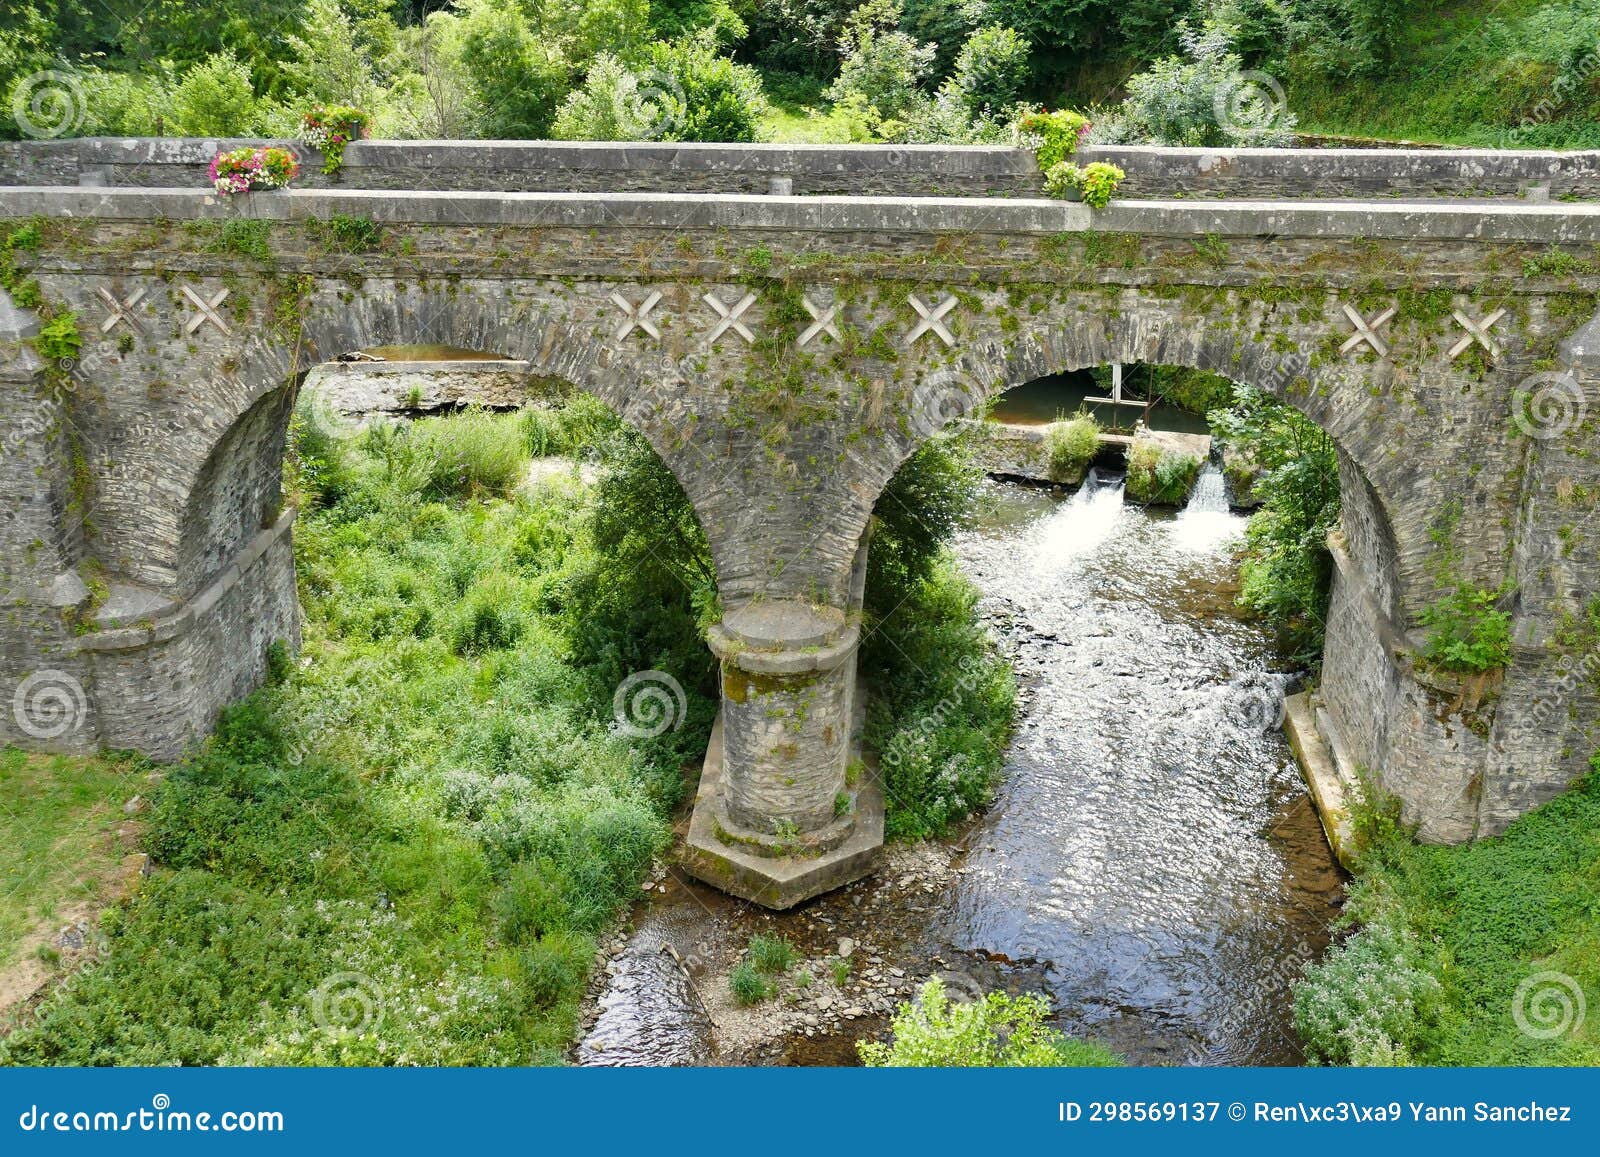 the old bridge over the gijou river in the village of lacaze